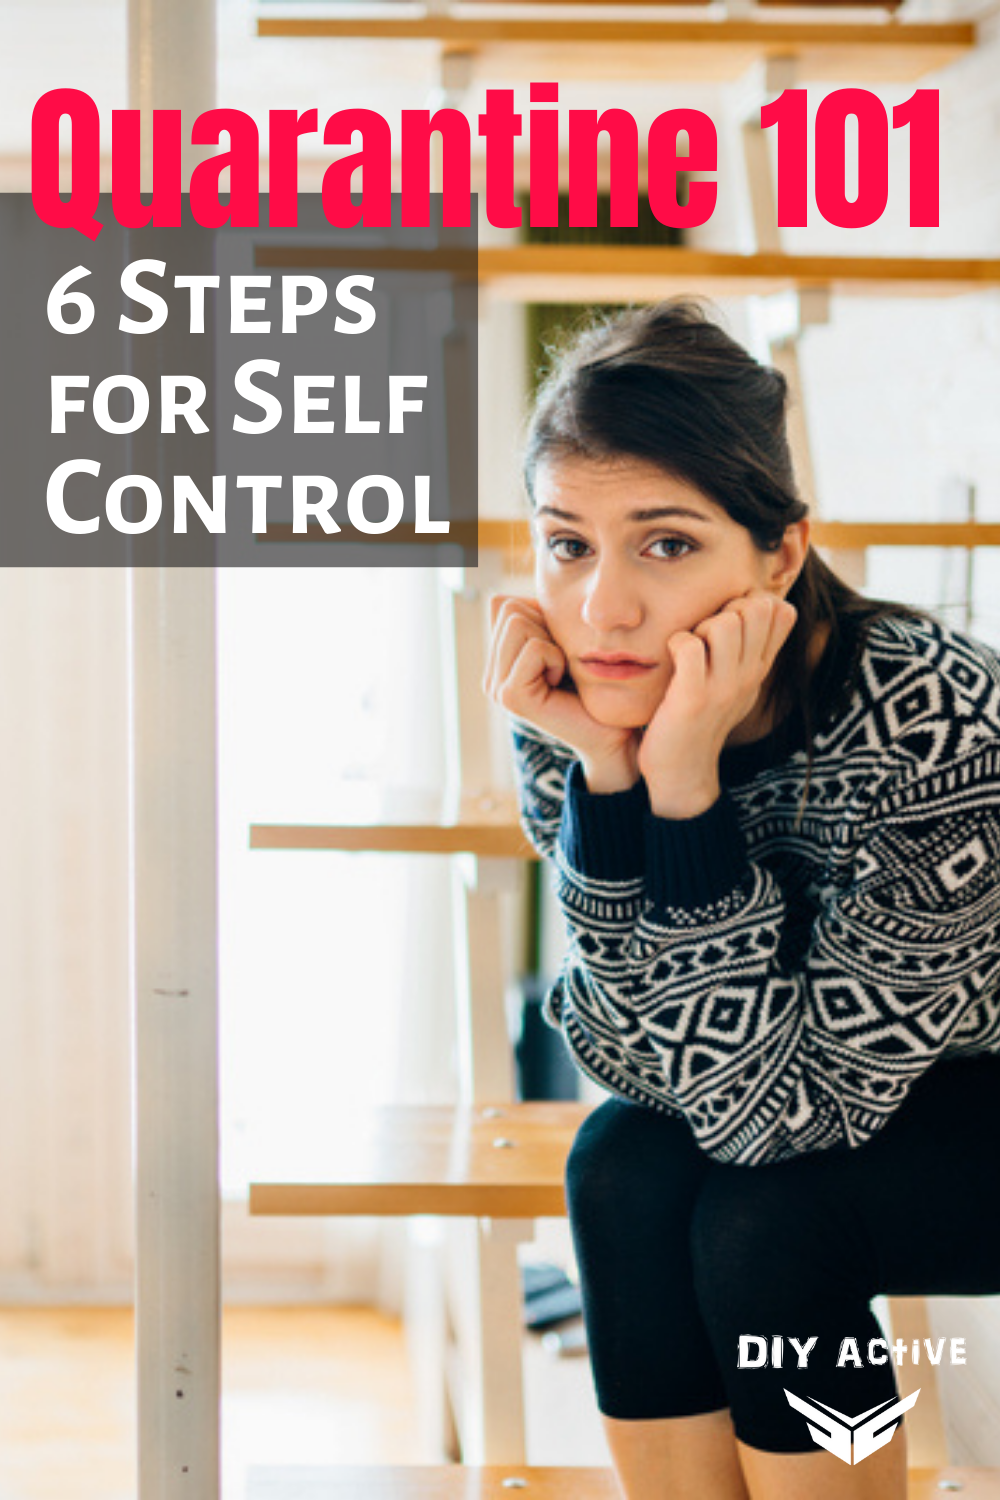 6 Steps to Take if You Feel Self-Control Slipping During Quarantine